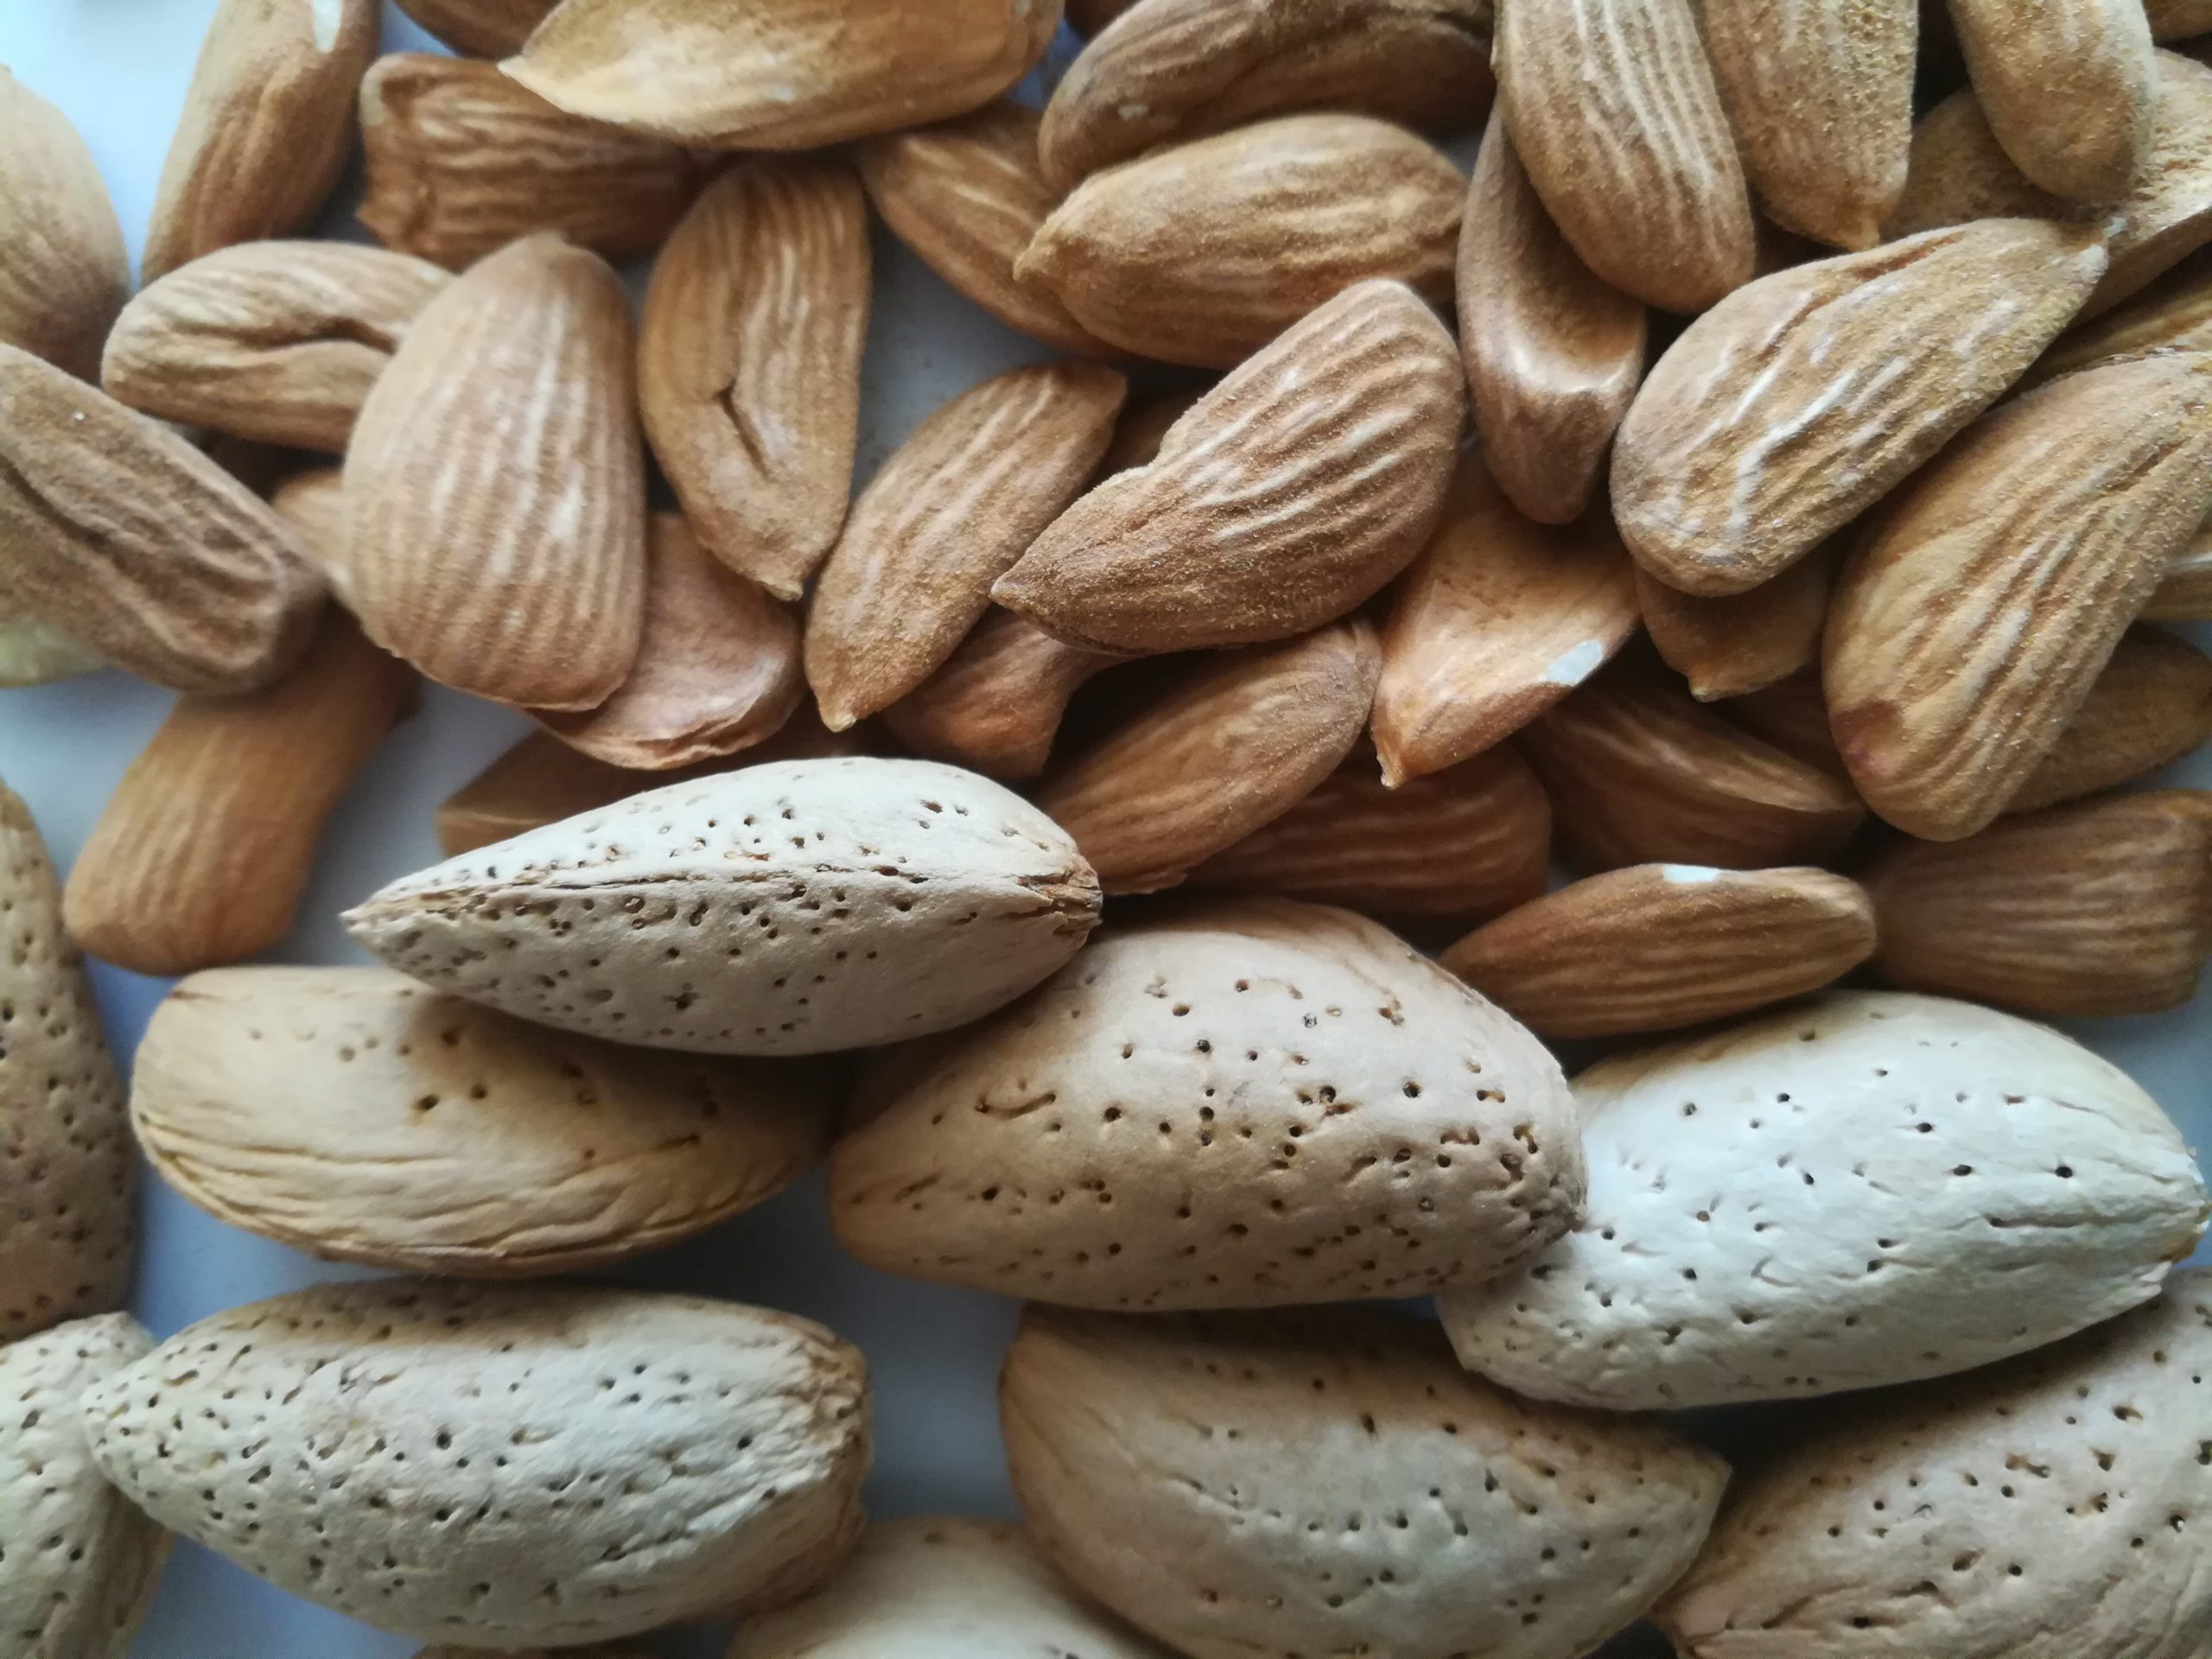 Special properties and benefits of Mamra almonds